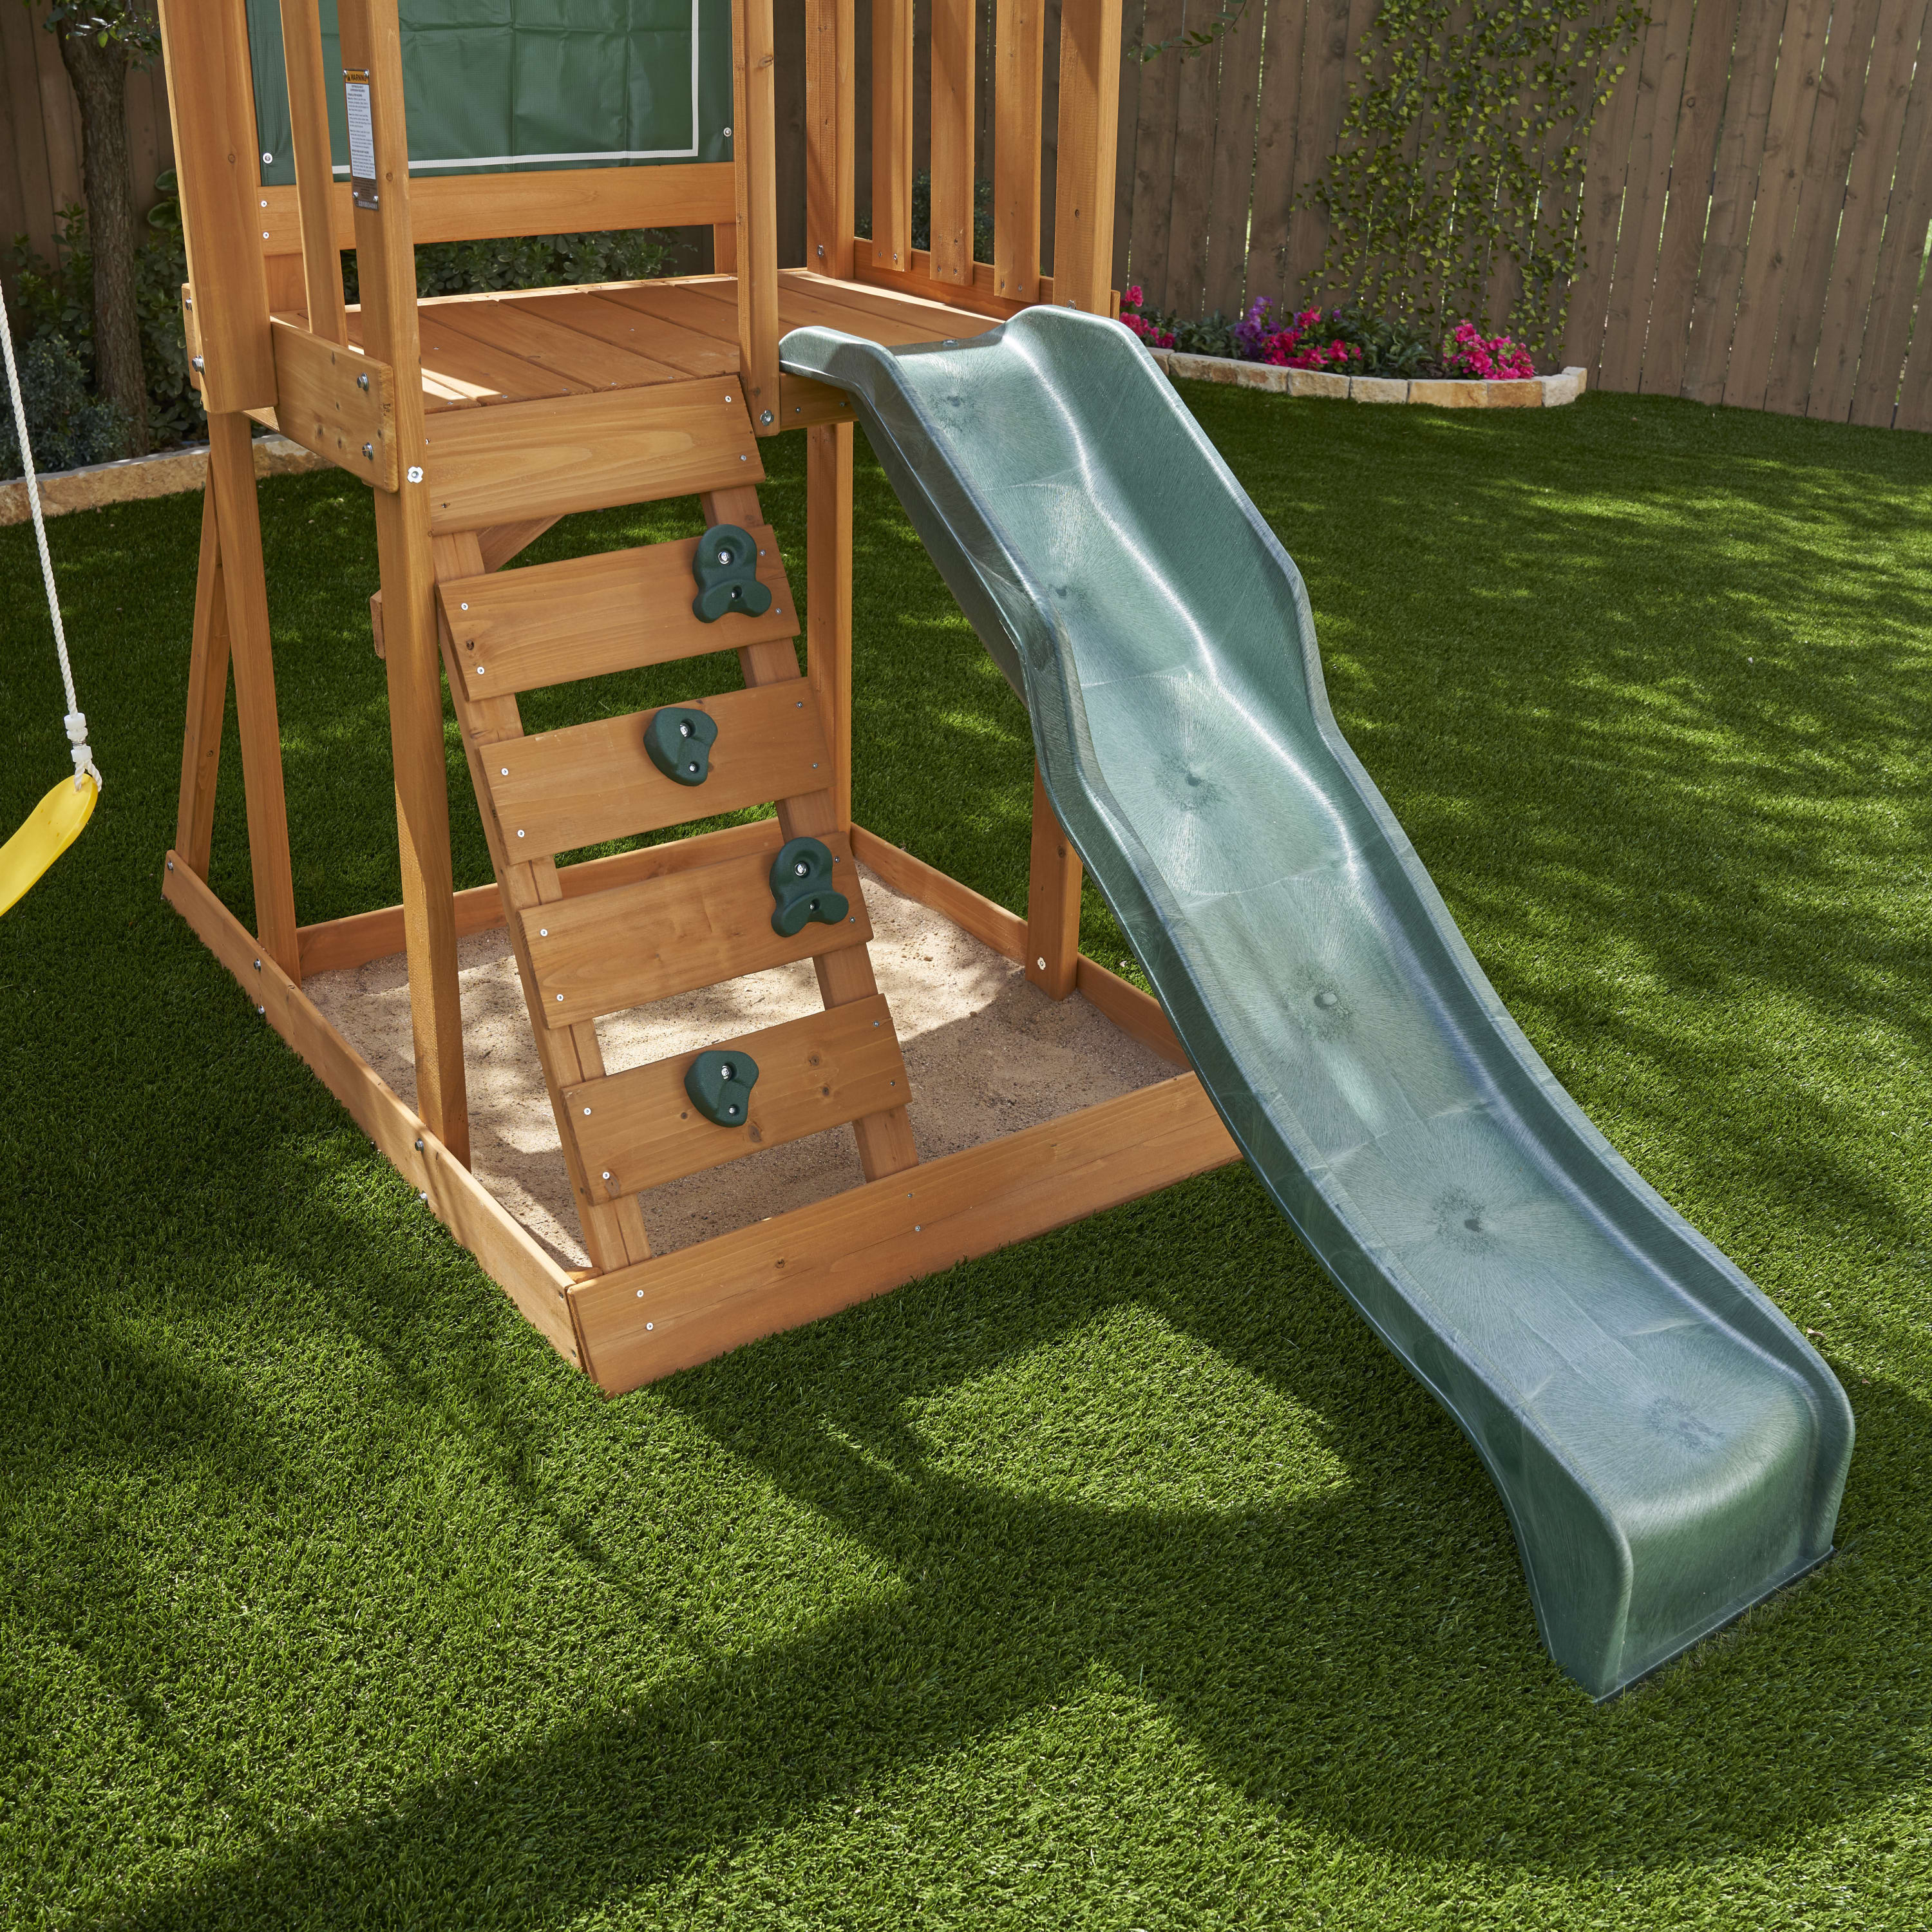 KidKraft Ainsley Wooden Outdoor Swing Set with Slide and Rock Wall - image 4 of 11